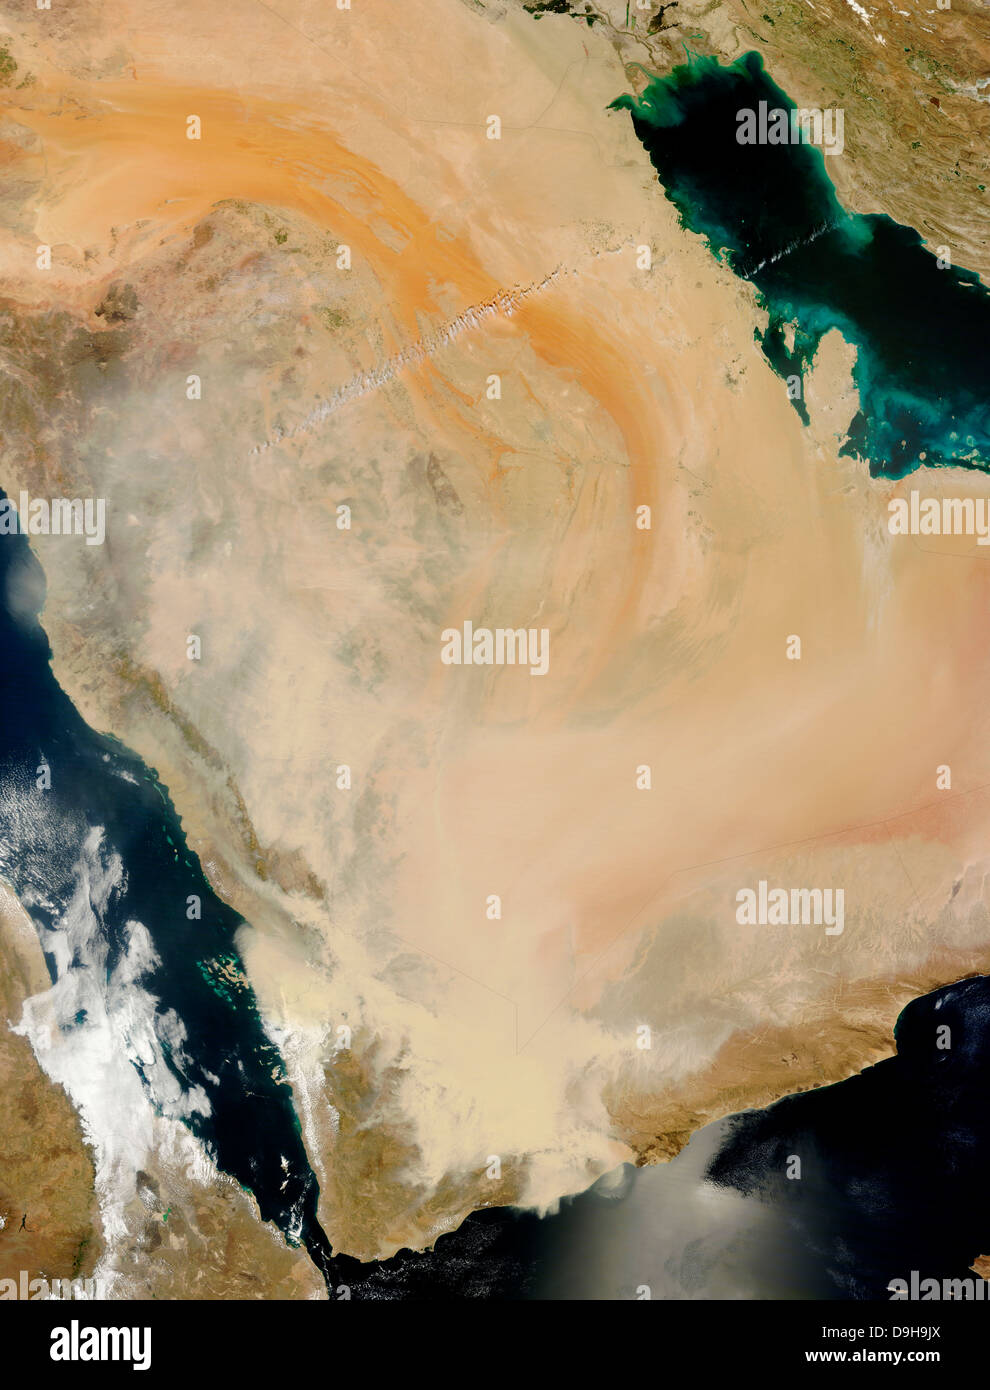 March 27, 2011 - Satellite view of a dust storm in Saudi Arabia. Stock Photo